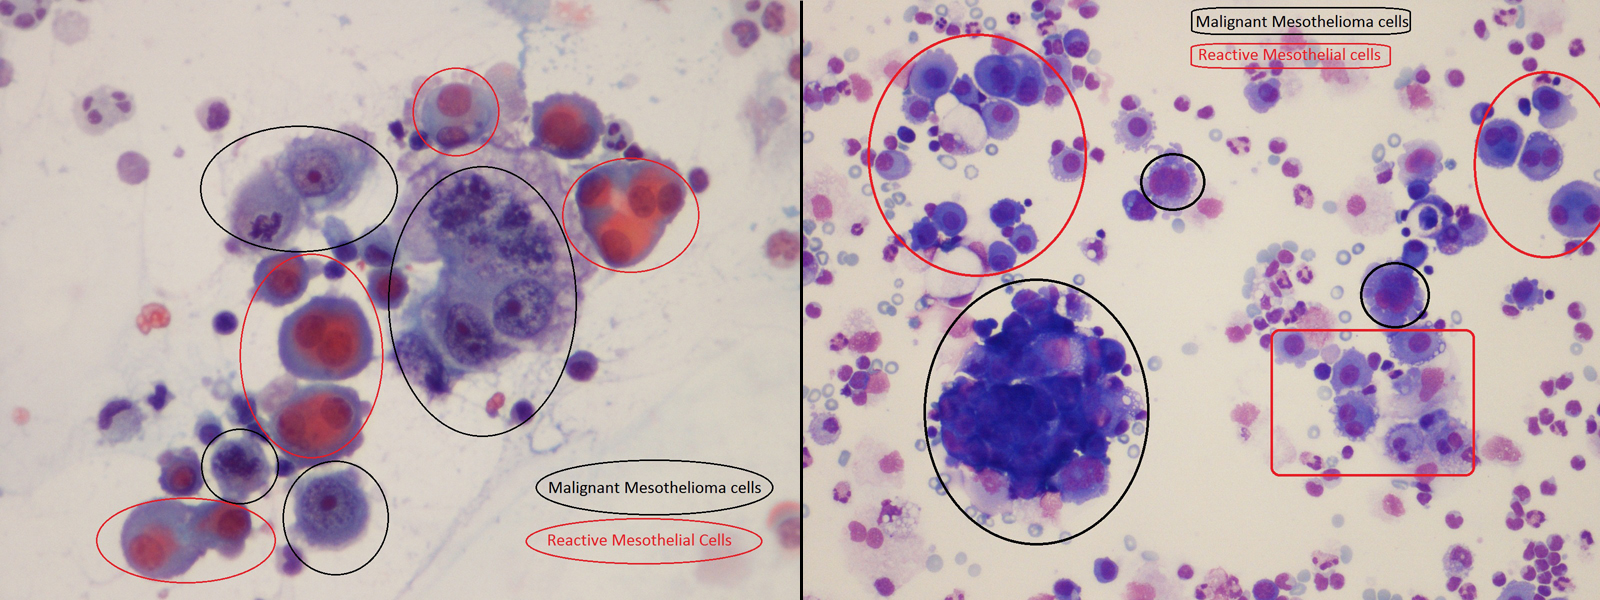 Malignant Mesothelioma -- The Cancer Of The Mesothelial Cells